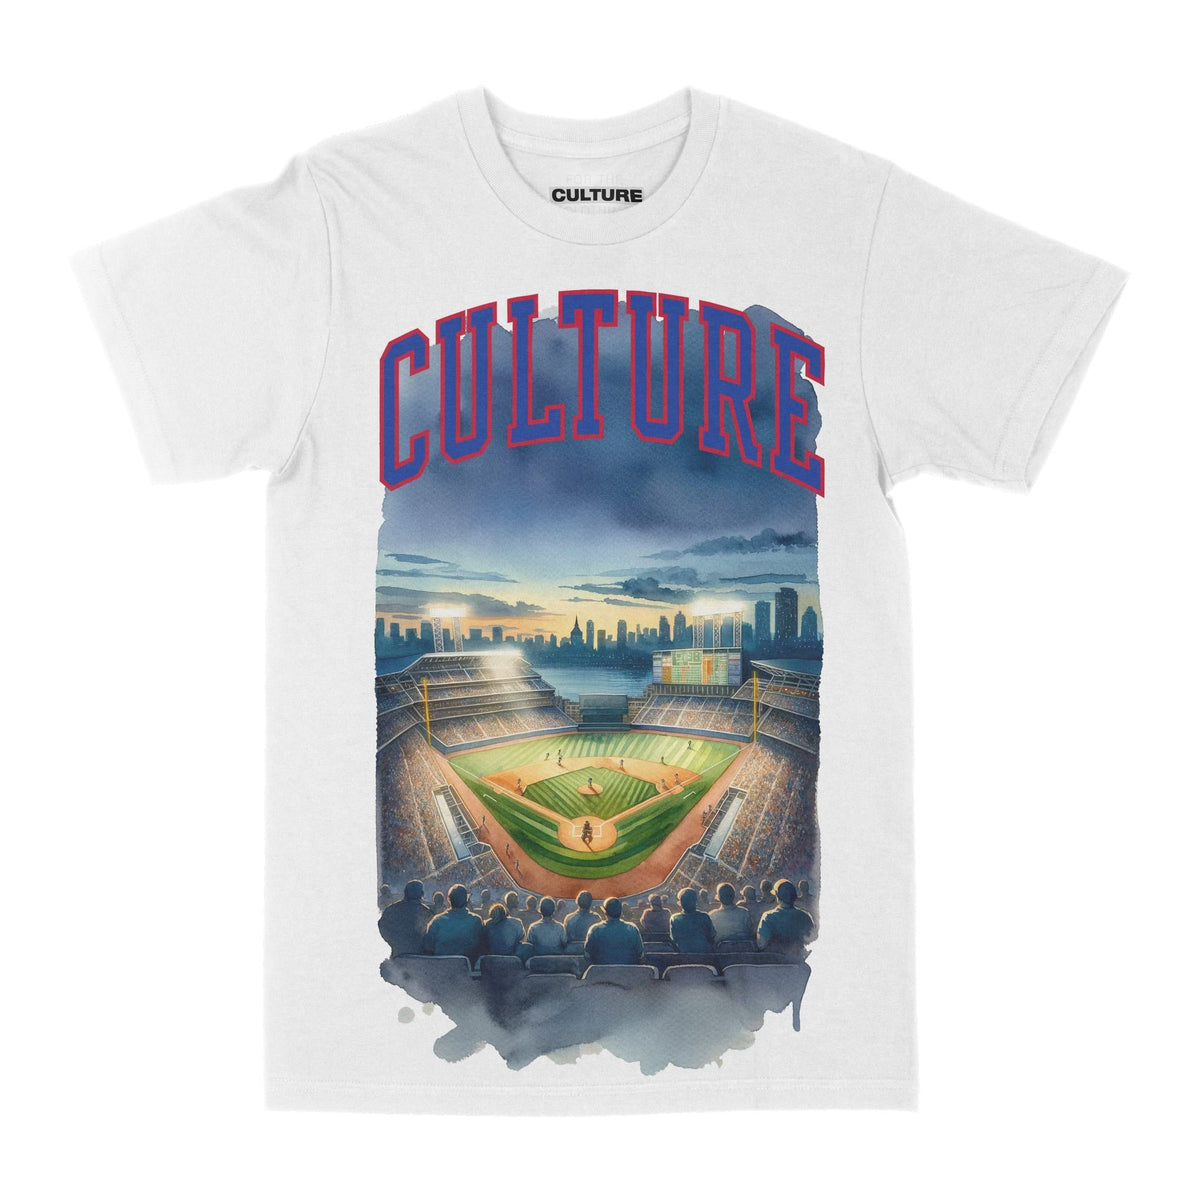 America’s Pastime Culture - For The Culture Clothing Inc.